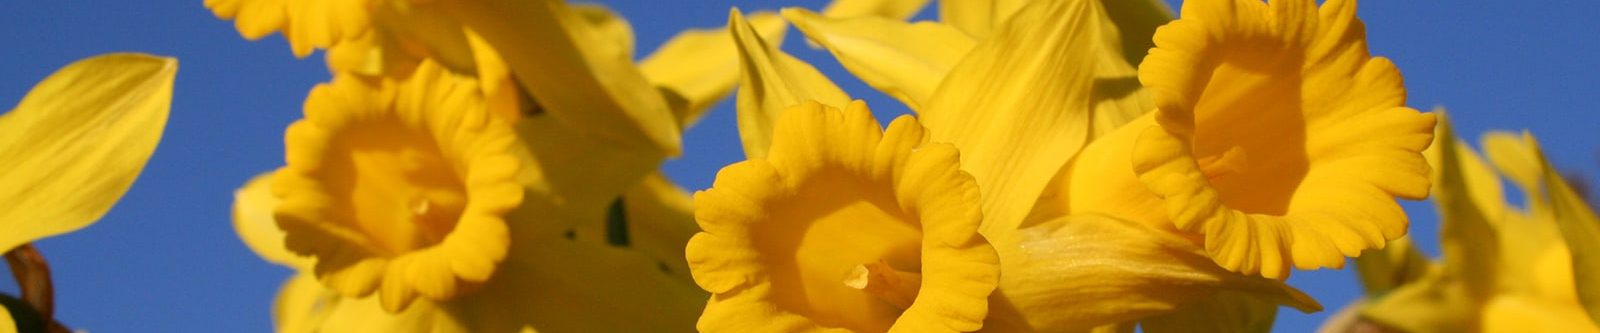 Yellow daffodils with a blue sky background